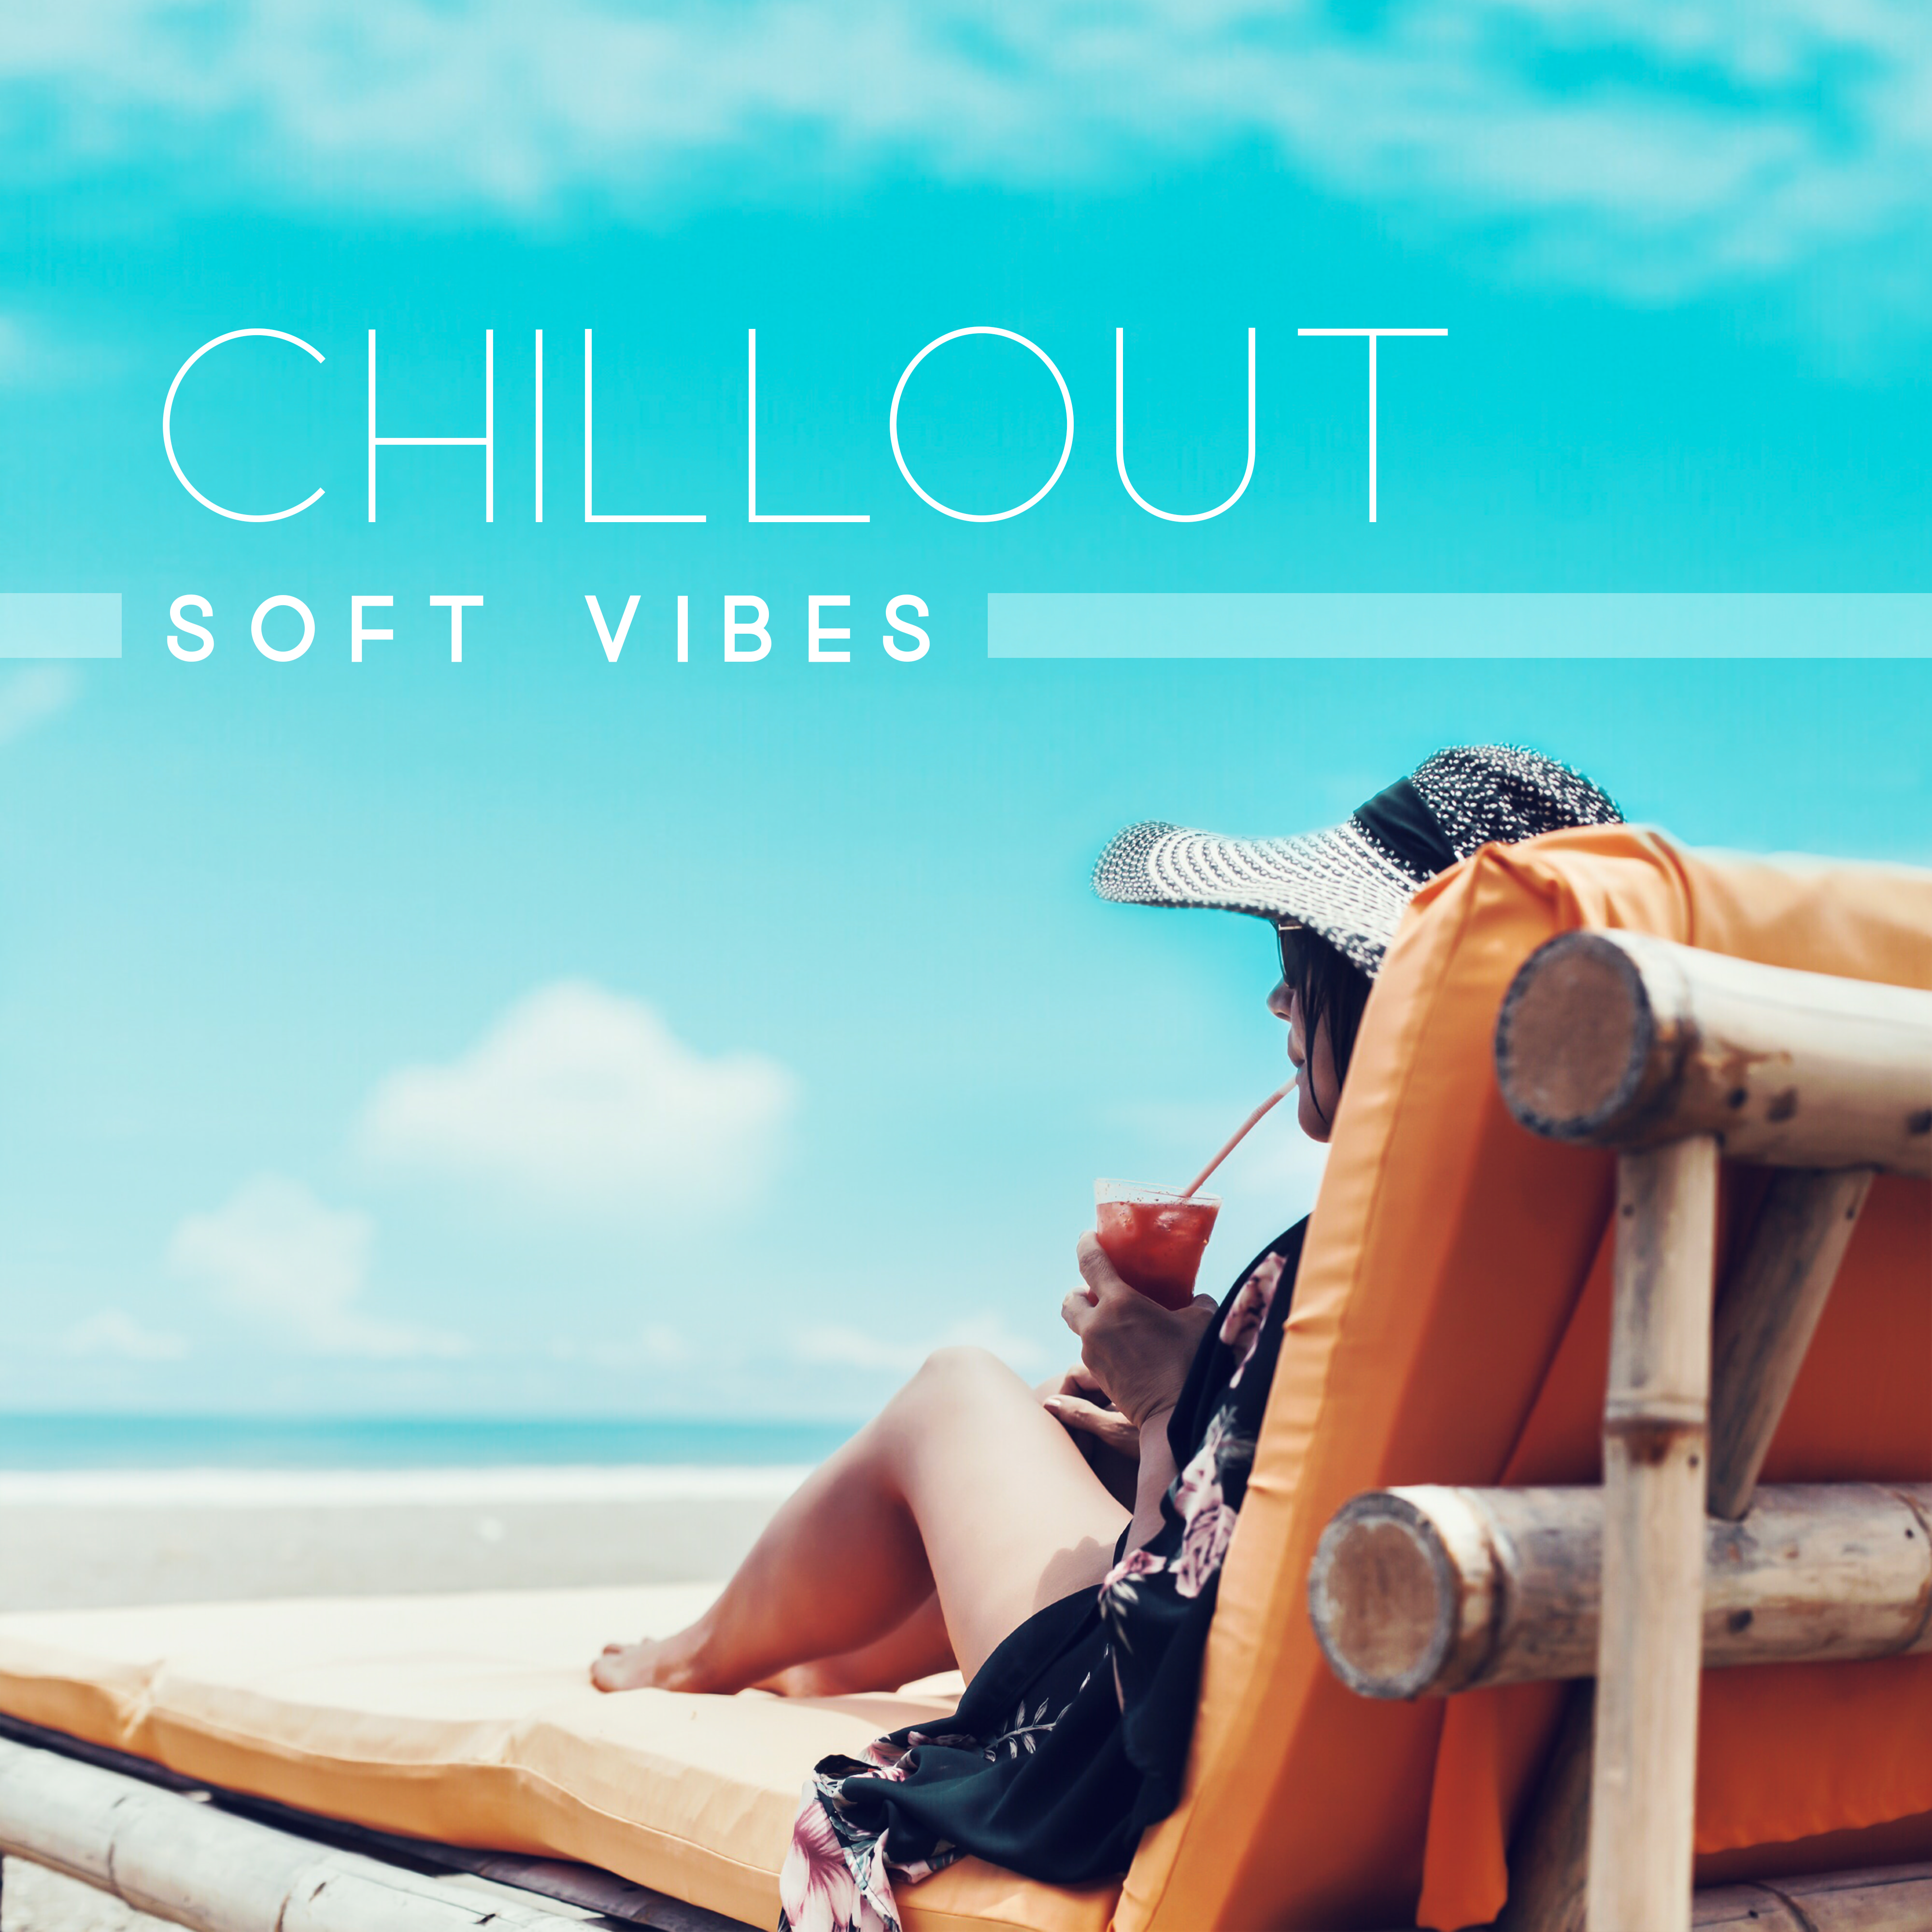 Chillout Soft Vibes